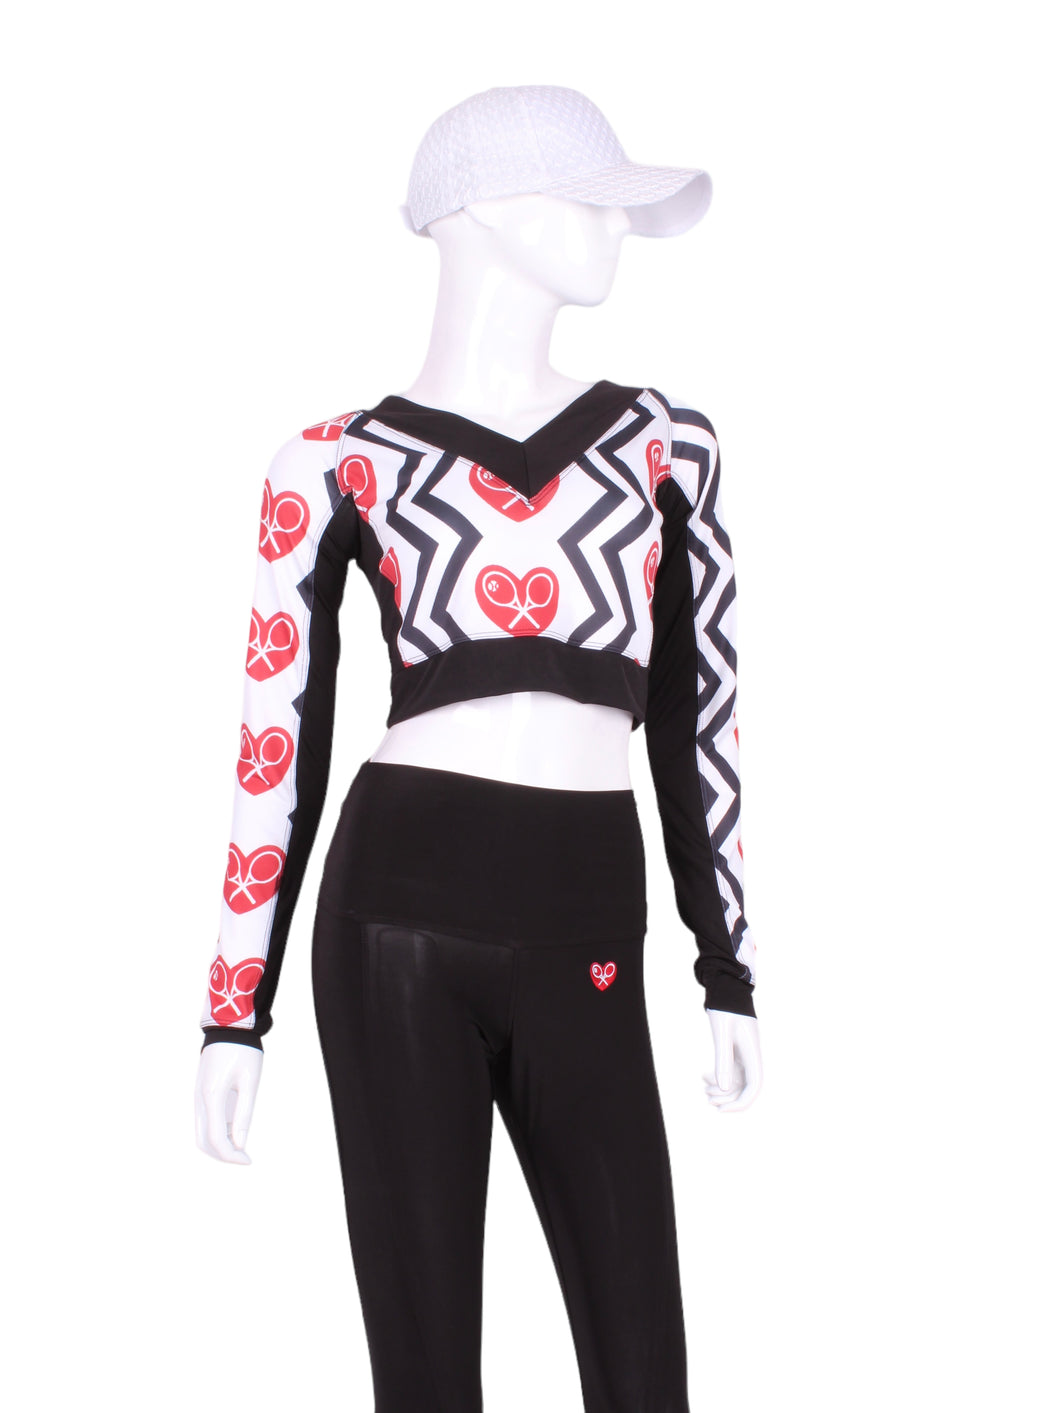 This vee neckline tops arm protection from the sun.  This piece has the Black Zig Zag and Red Heart + Rackets Trademarked Logo on a white background for a feminine and fun print.  Very limited edition only two made per size per style.